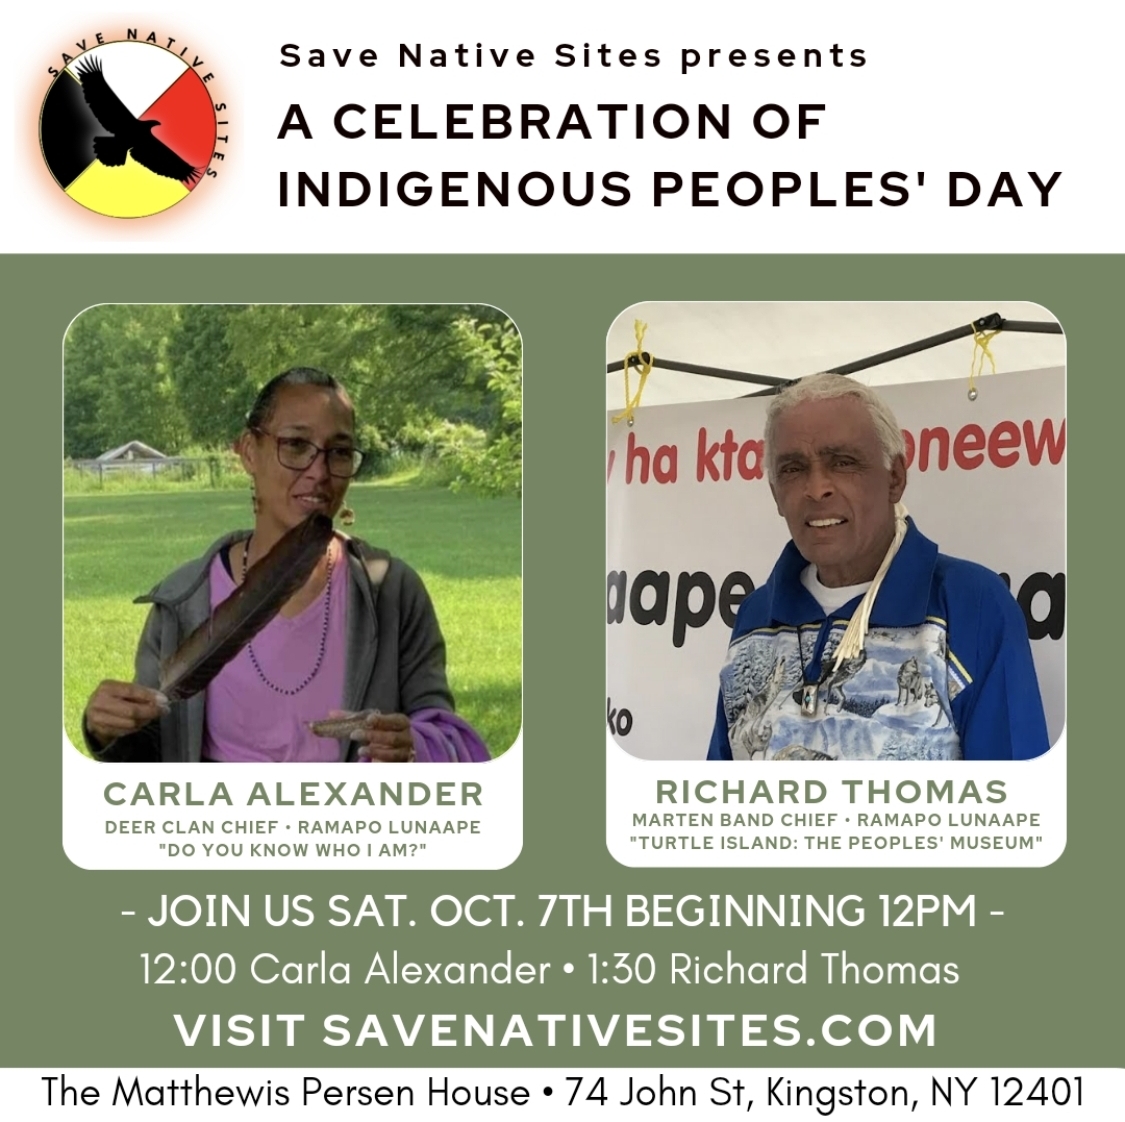 Activities announced for Indigenous Peoples Day